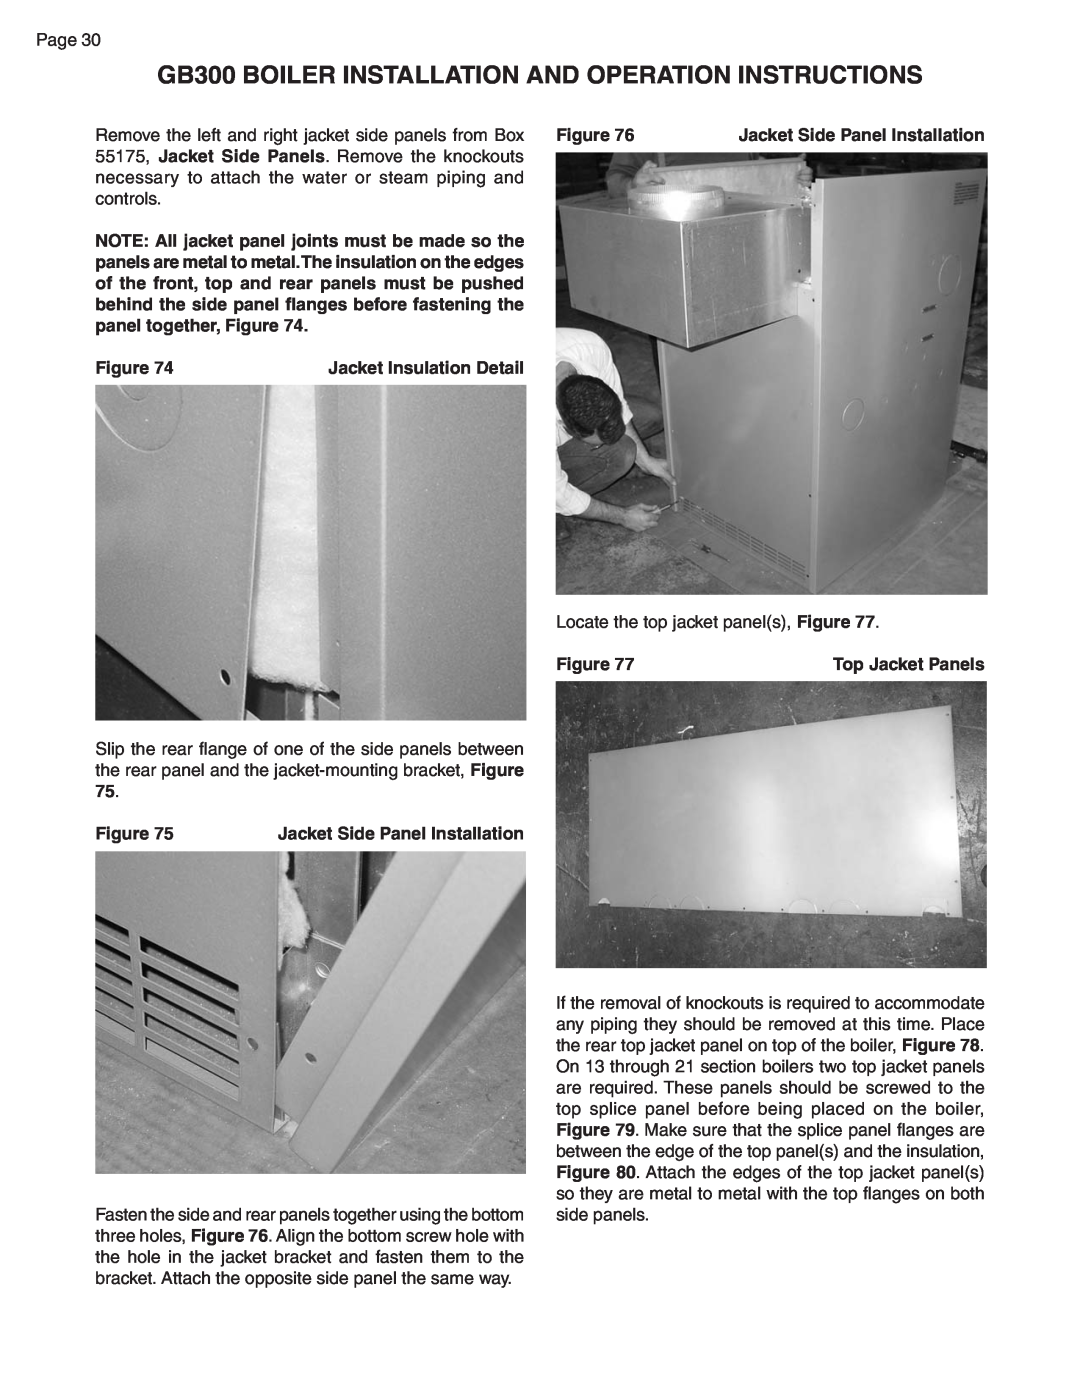 Smith Cast Iron Boilers GB300 55175, Jacket Side Panels. Remove the knockouts, controls, panel together, Figure 